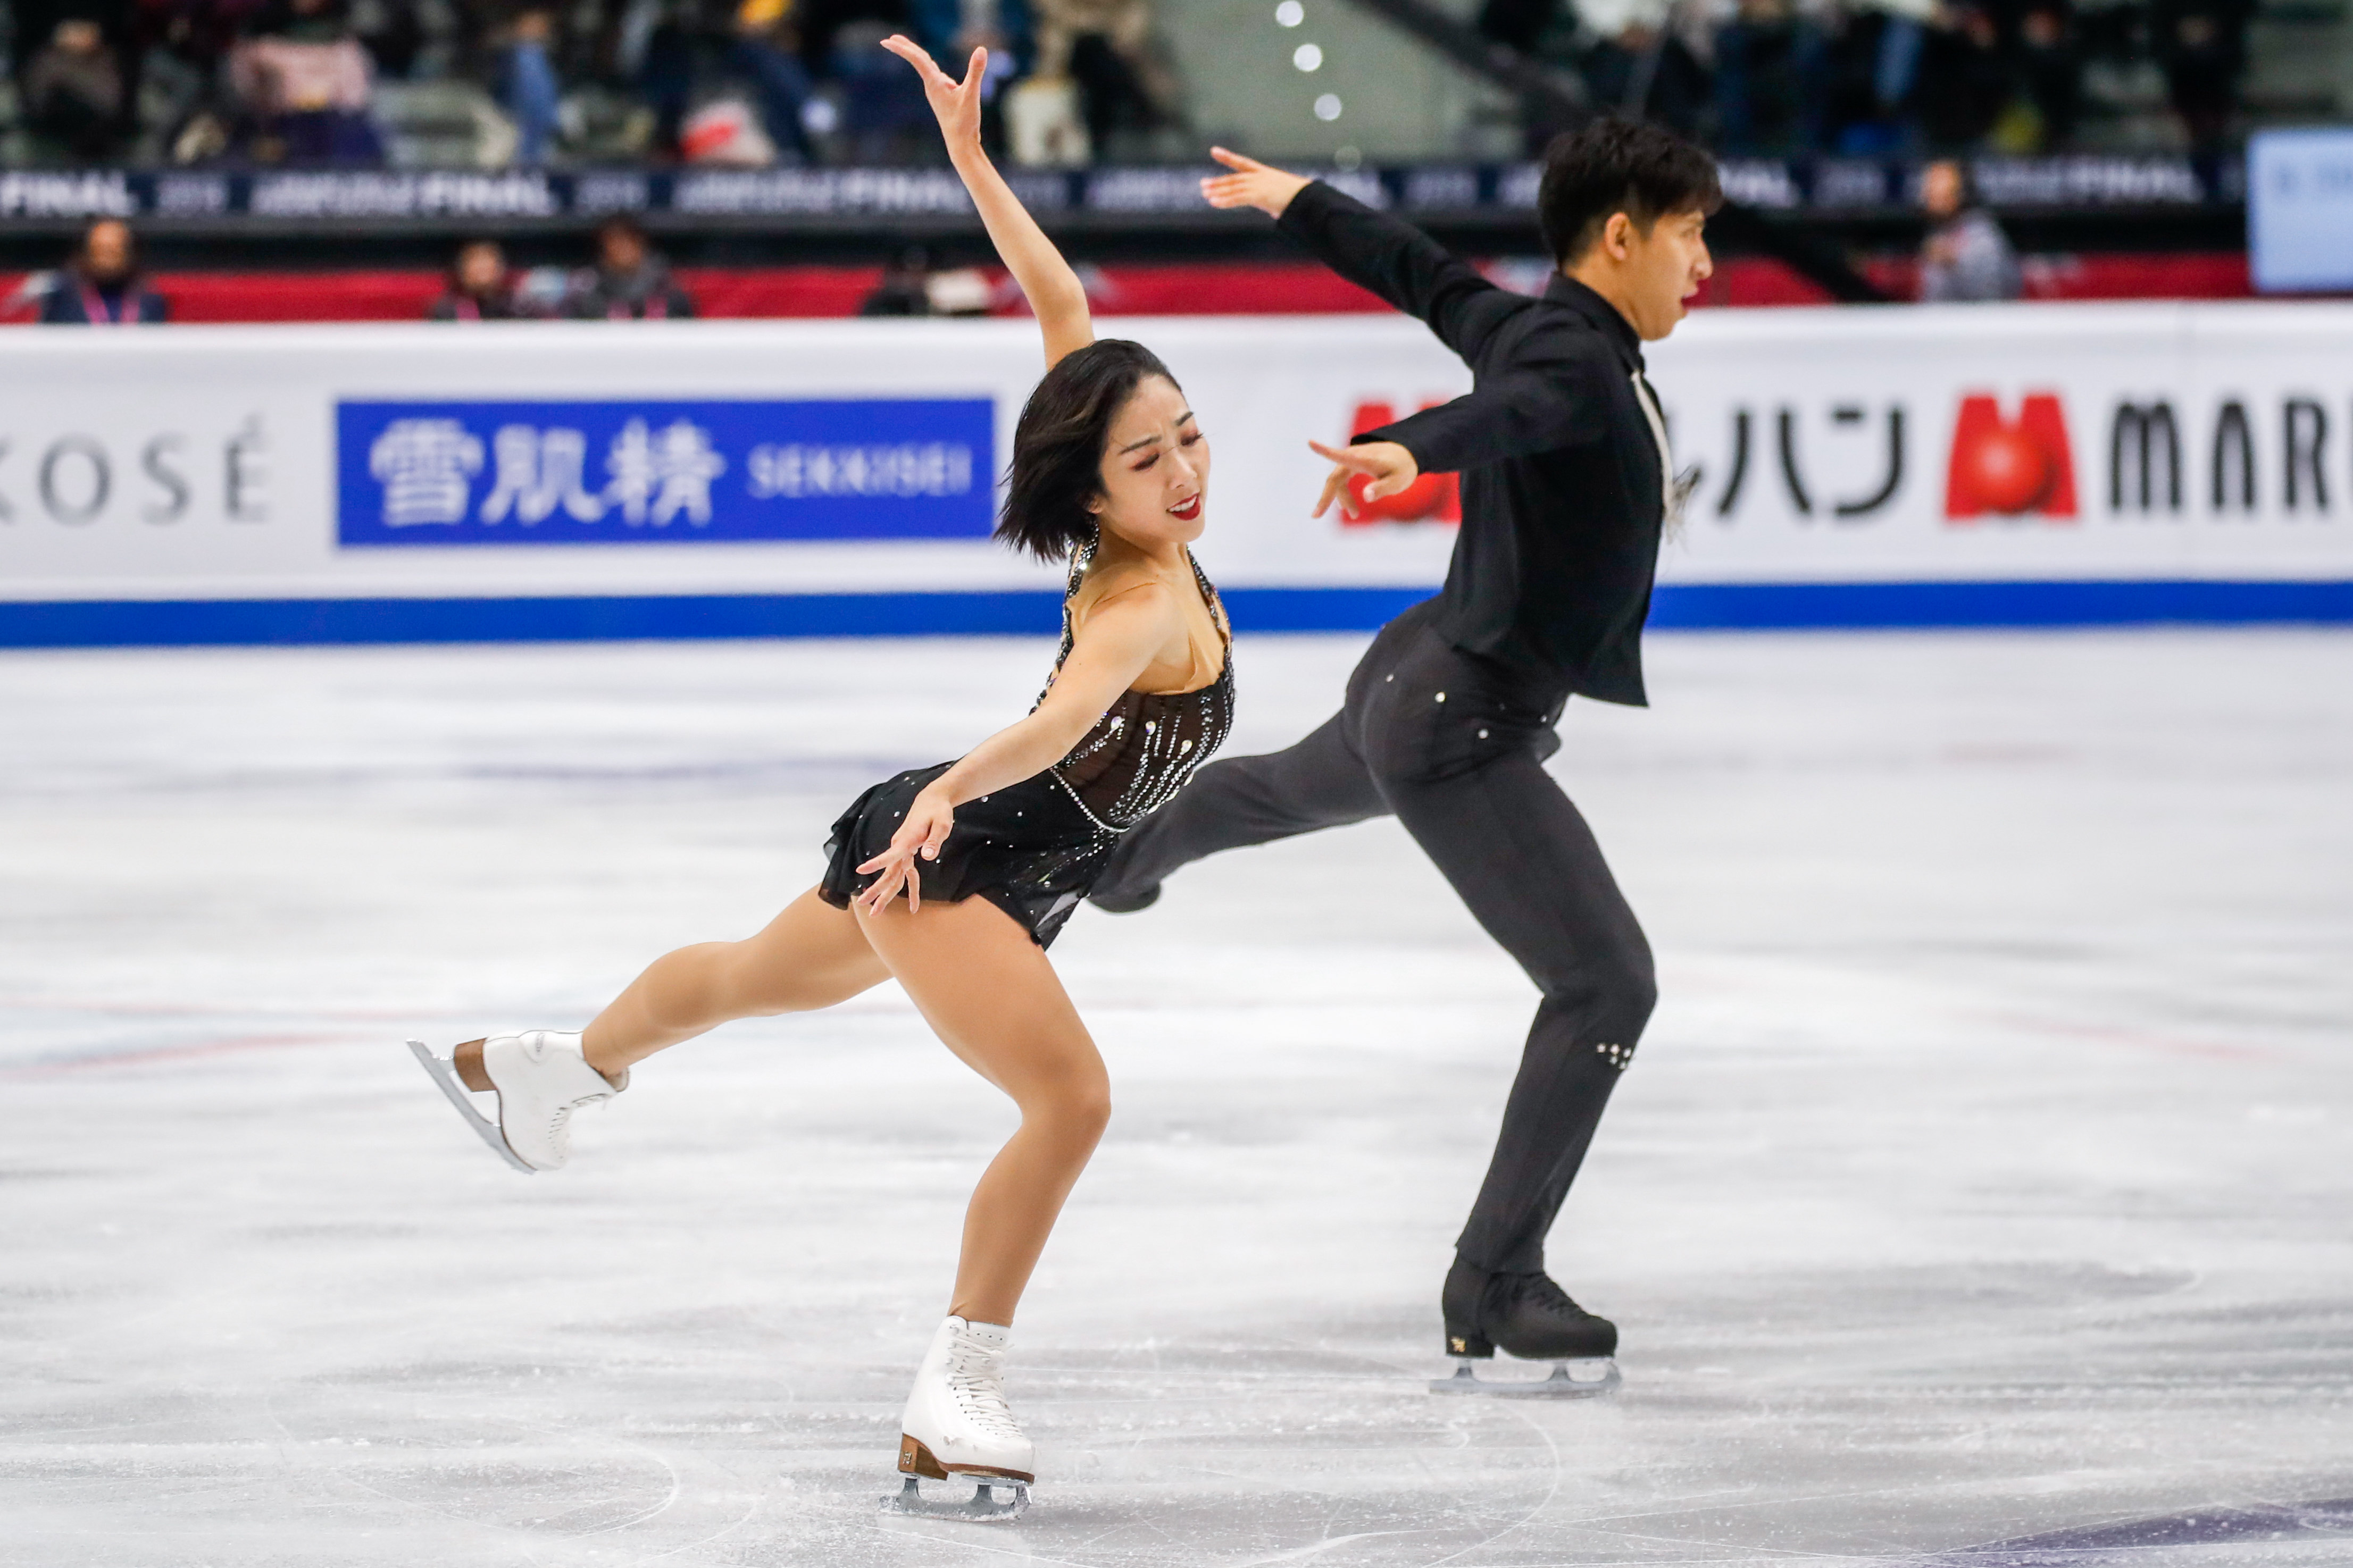 Sui Wenjing, Han Cong to miss Figure Skating Cup of China in Chongqing